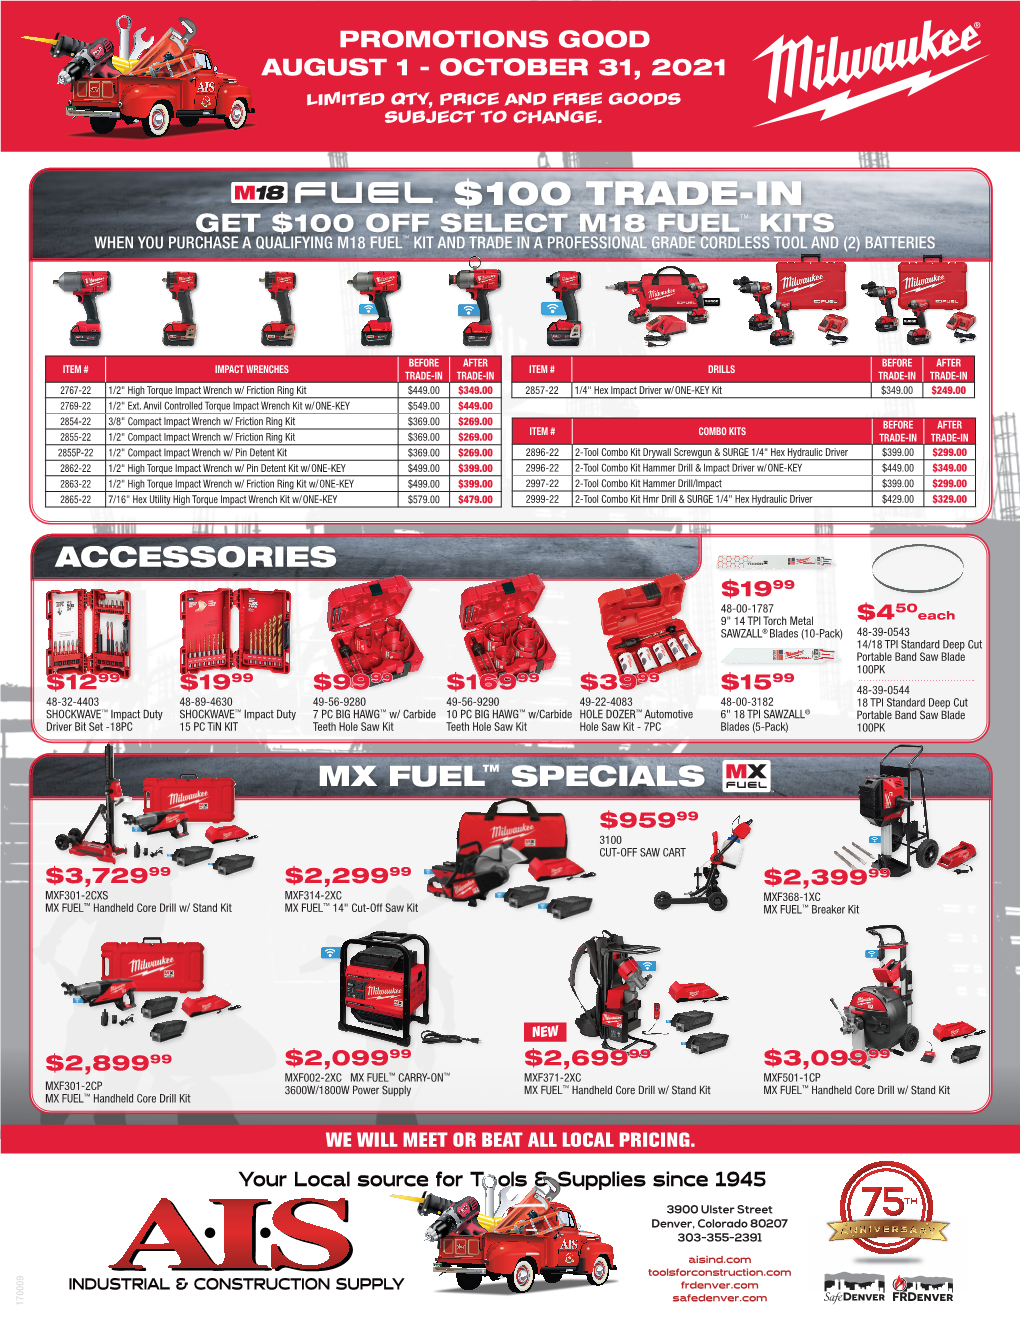 100 Trade-In Get $100 Off Select M18 Fueltm Kits When You Purchase a Qualifying M18 Fuel™ Kit and Trade in a Professional Grade Cordless Tool and (2) Batteries